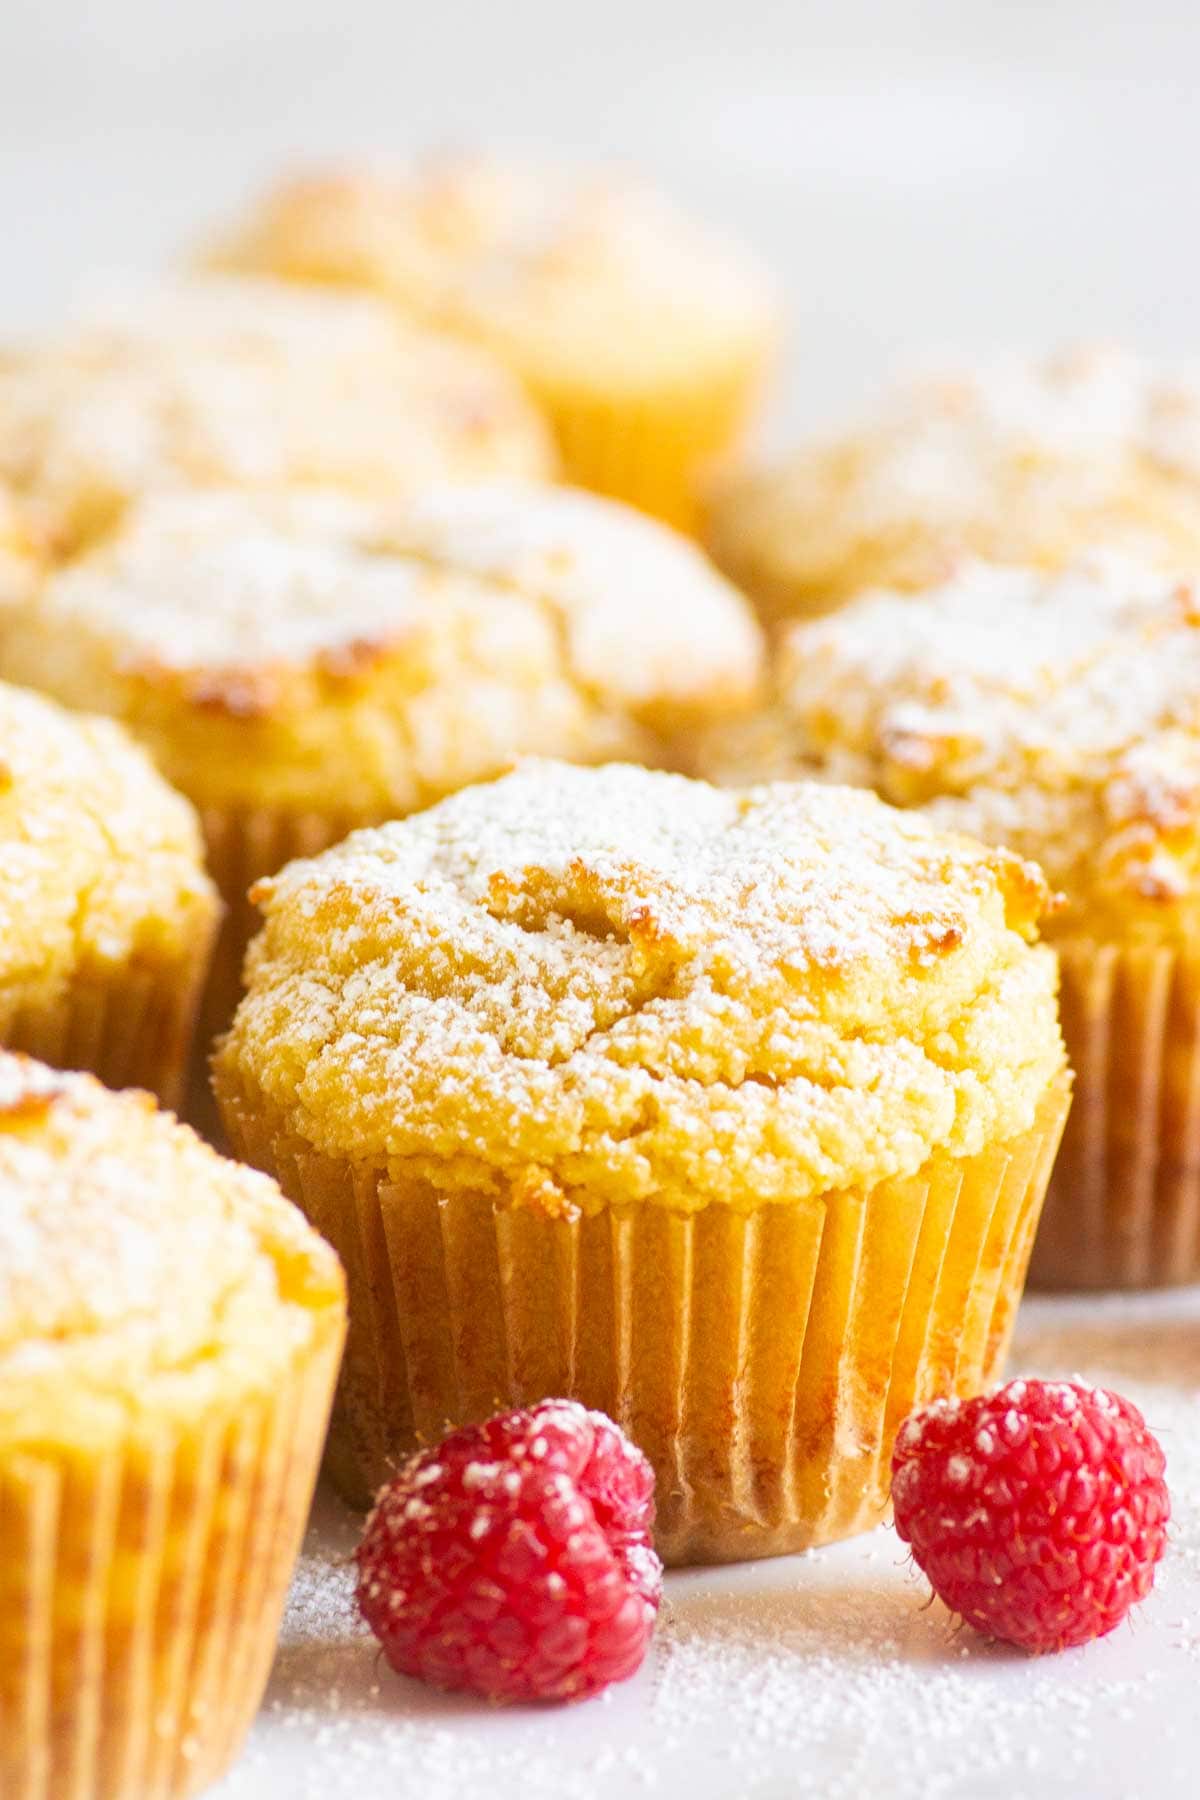 Almond flour muffins in paper liners with fresh raspberries.